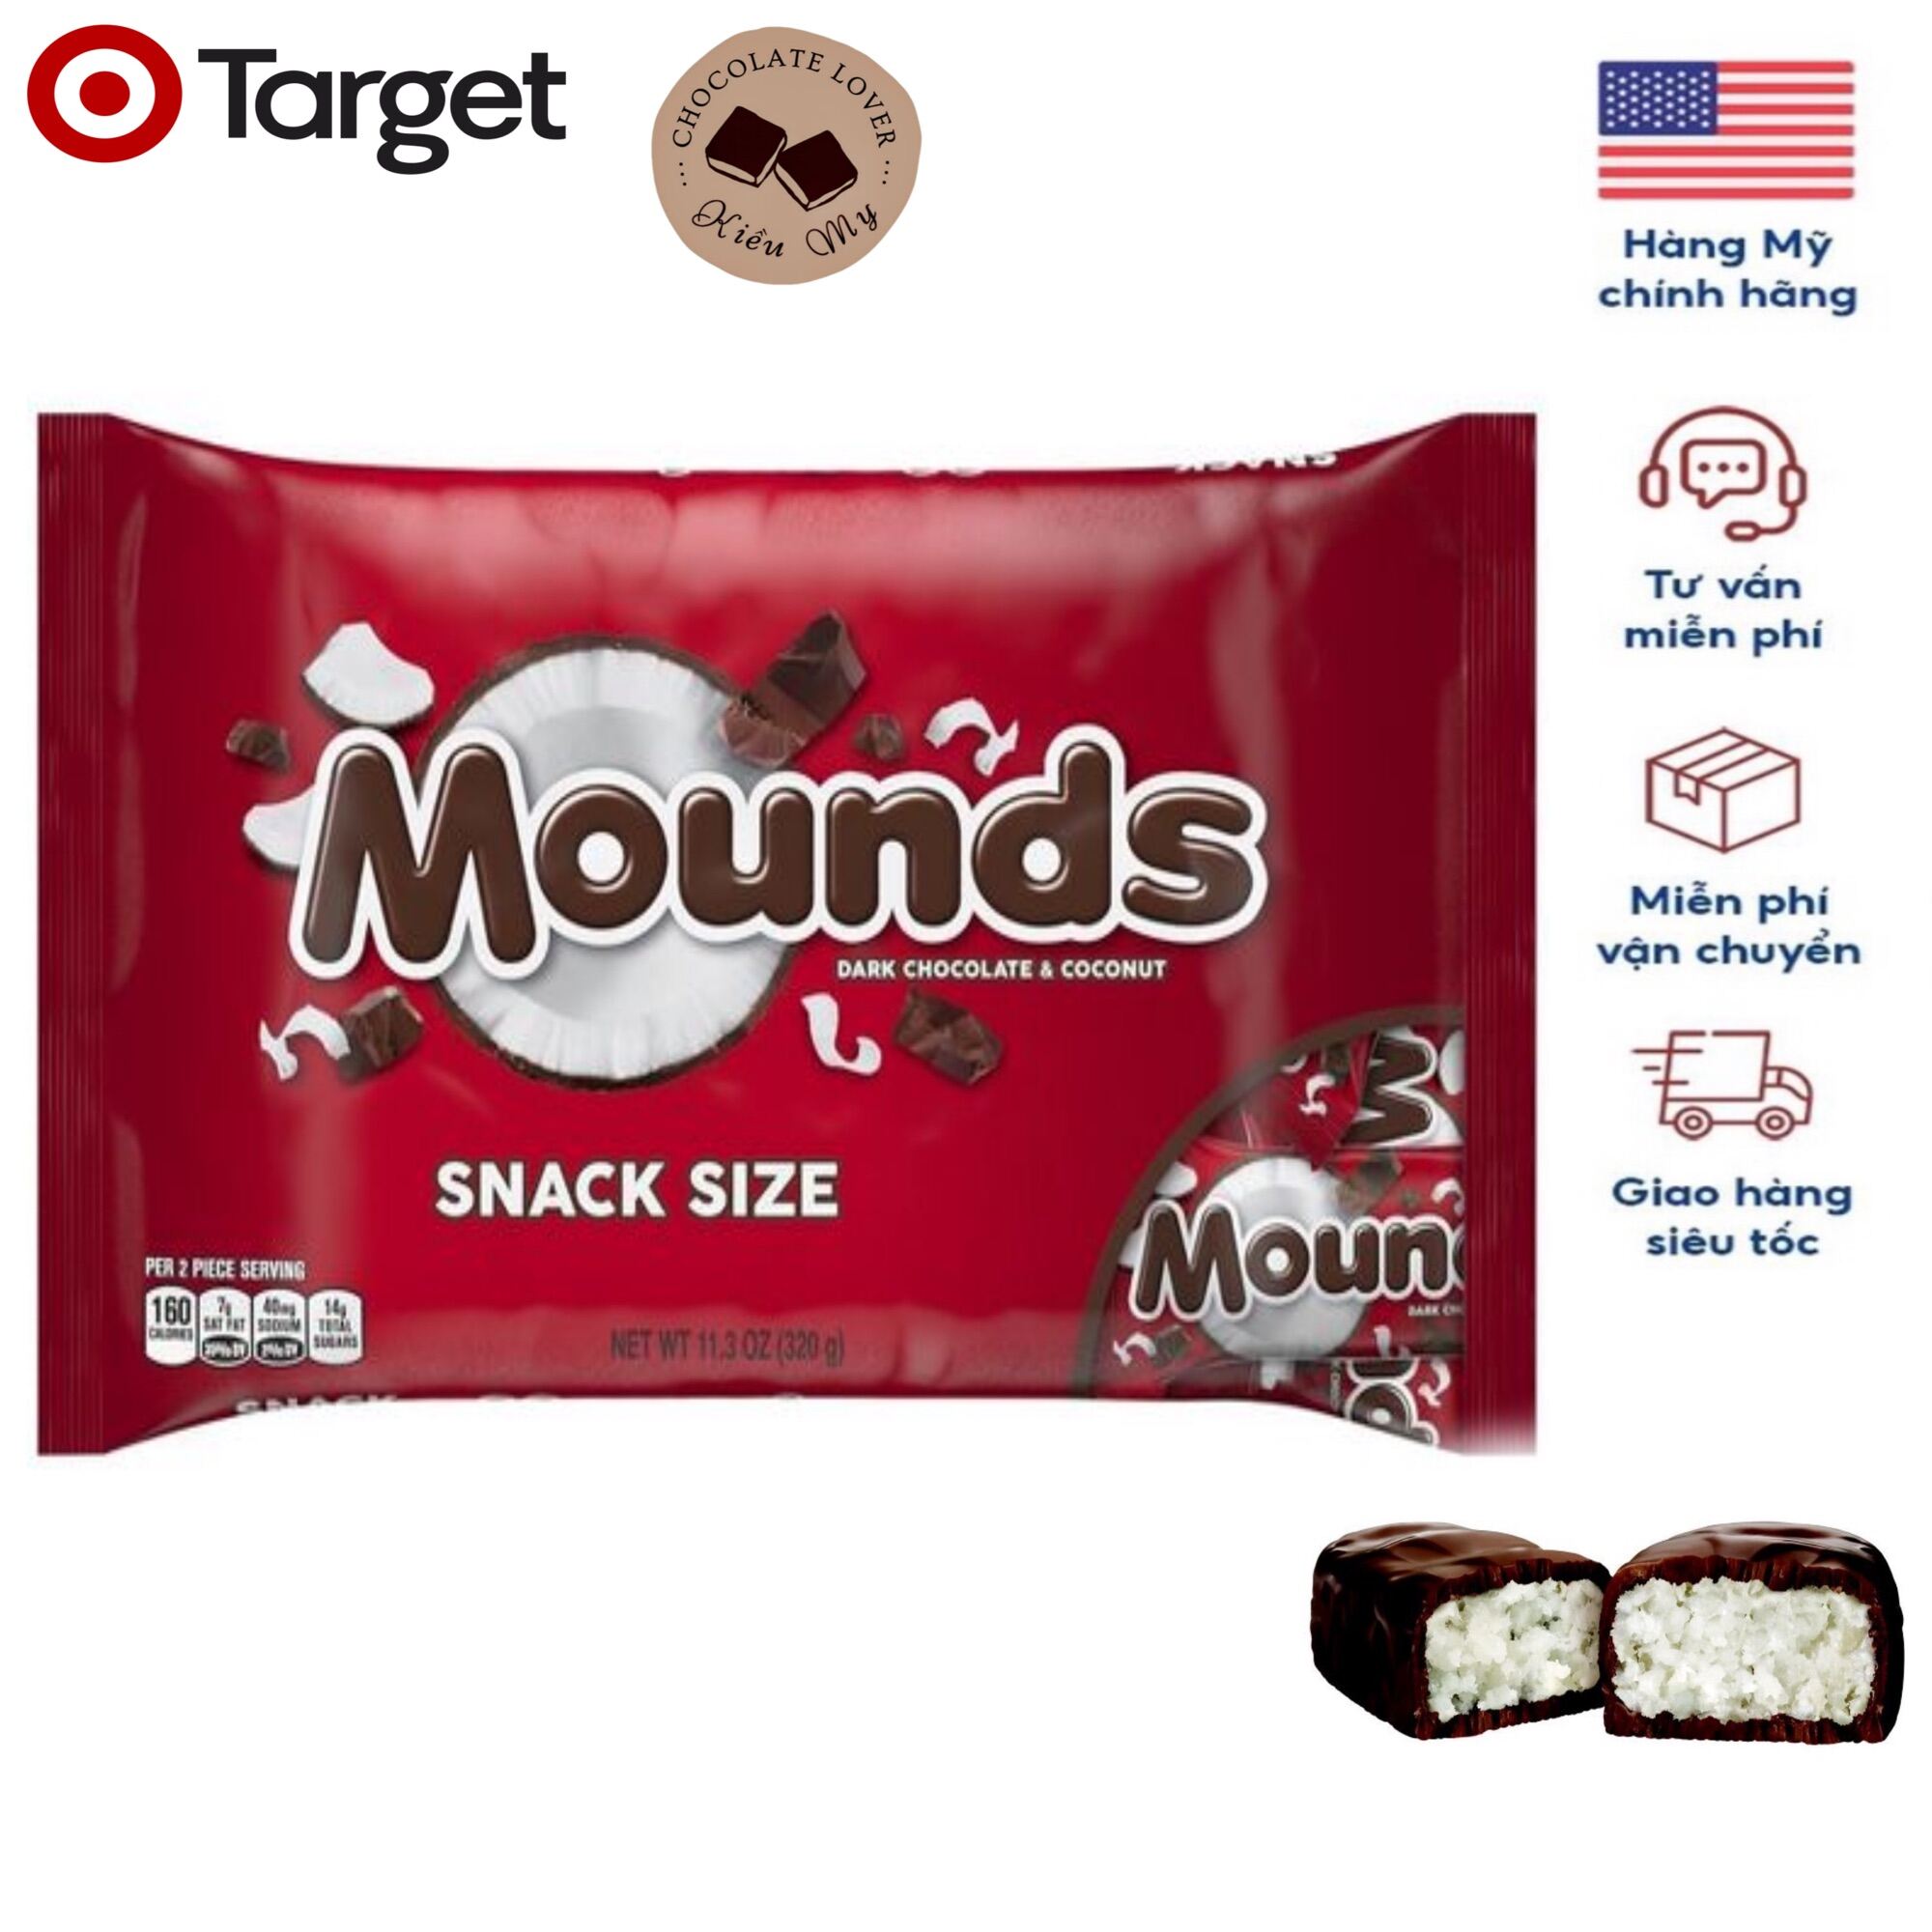 Date 04 23 candy chocolate coconut American mounds bag 320g